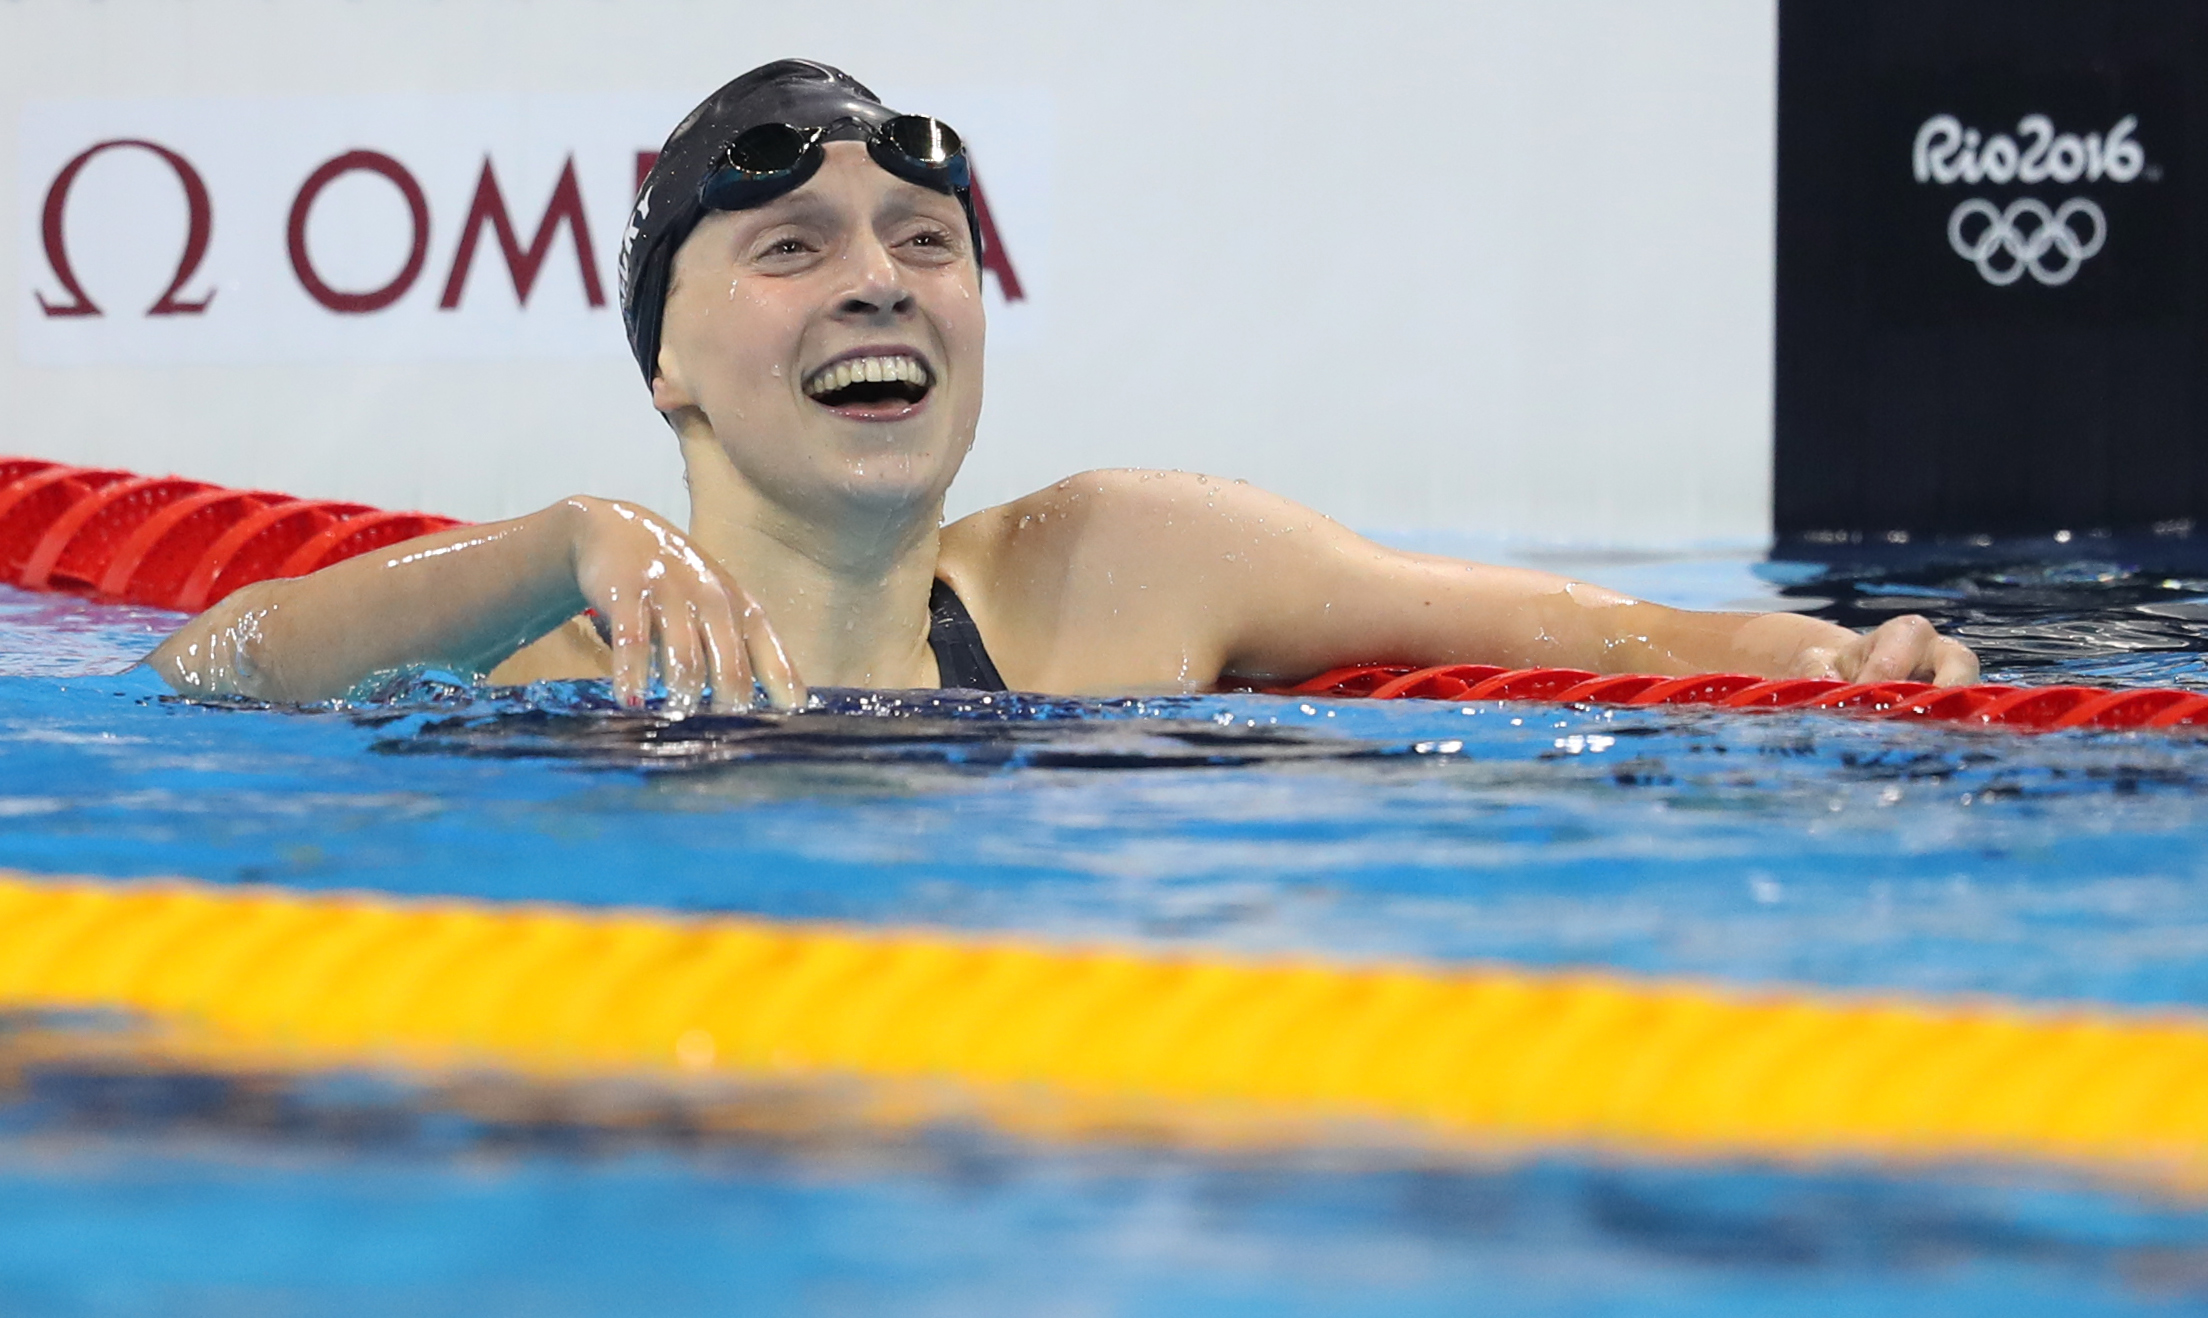 US Olympic swimmer Katie Ledecky celebrates winning a thrilling Women's 200m Freestyle final at the 2016 Summer Olympic Games in Rio de Janeiro, Brazil.